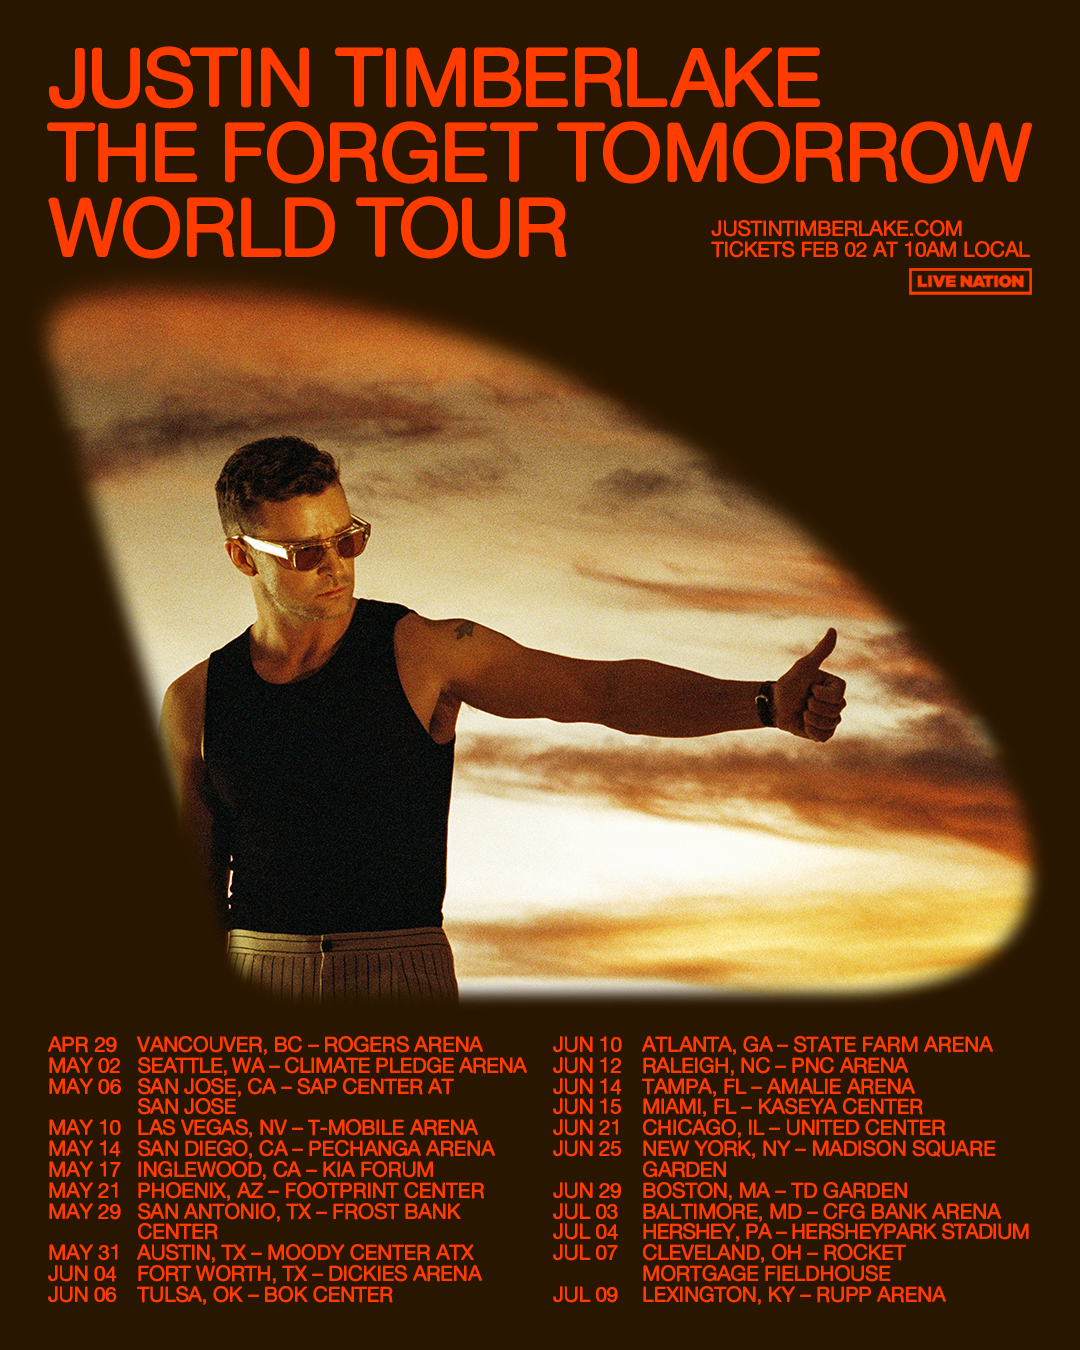 Justin Timberlake - The Forget Tomorrow World Tour in der Amalie Arena Tickets